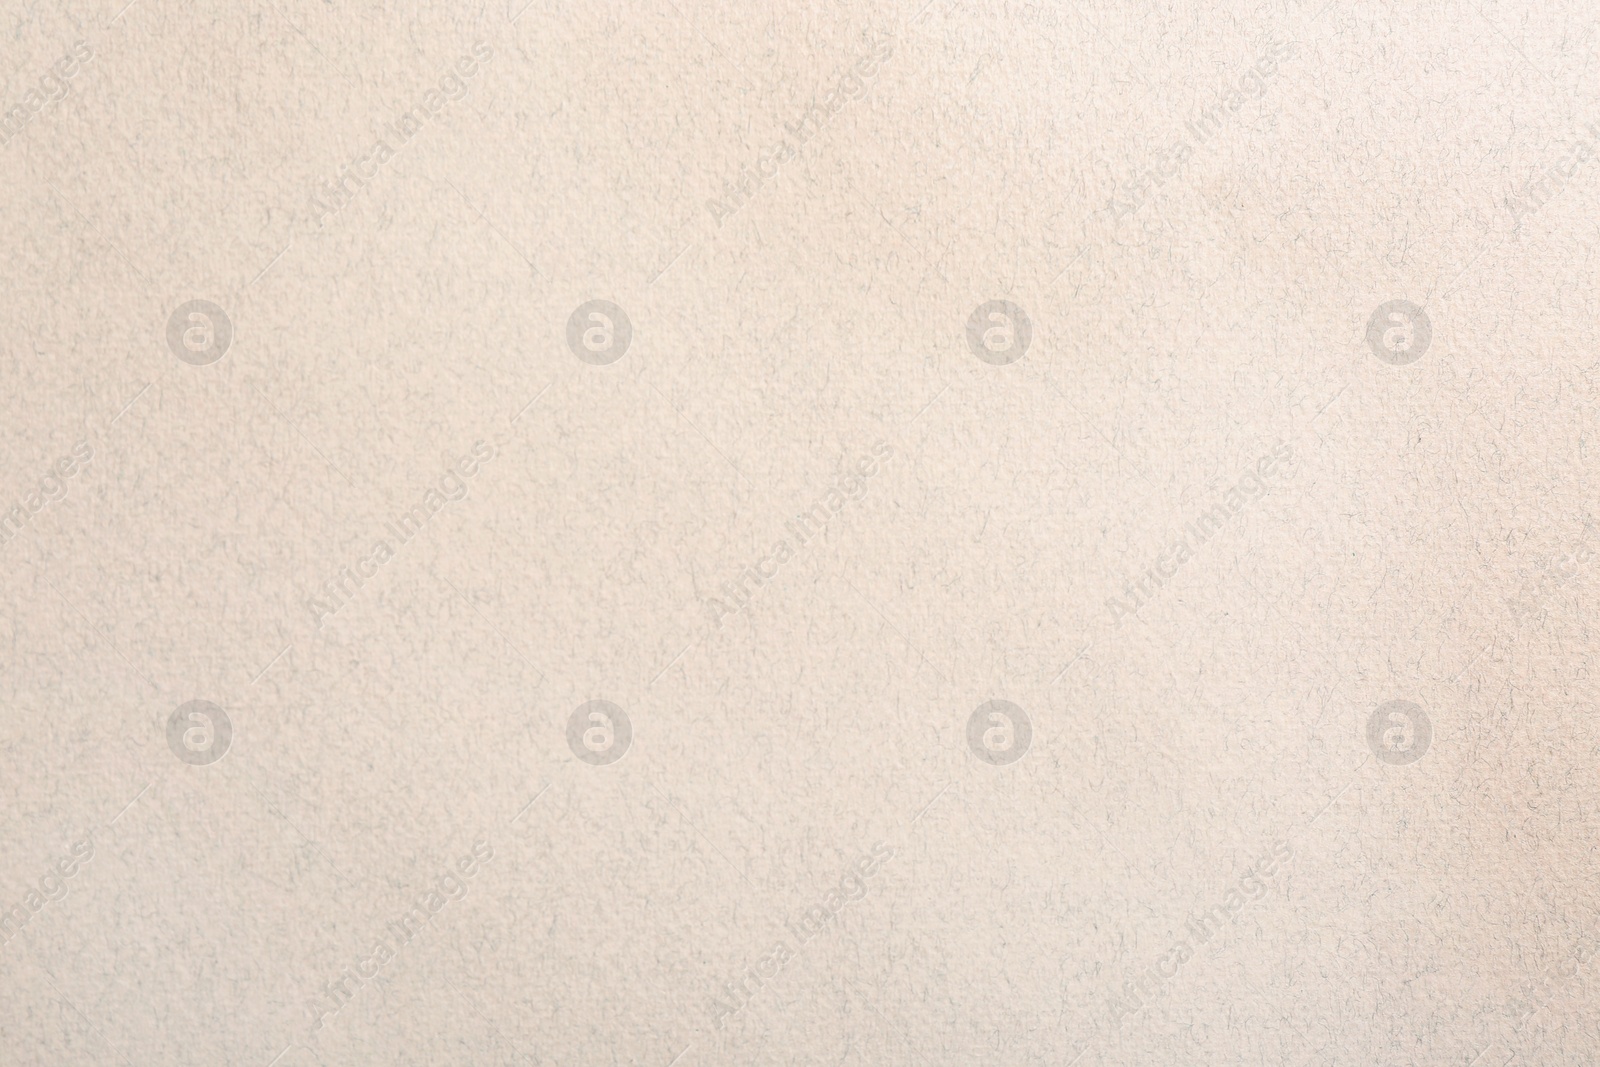 Photo of Recycled paper texture as background, top view